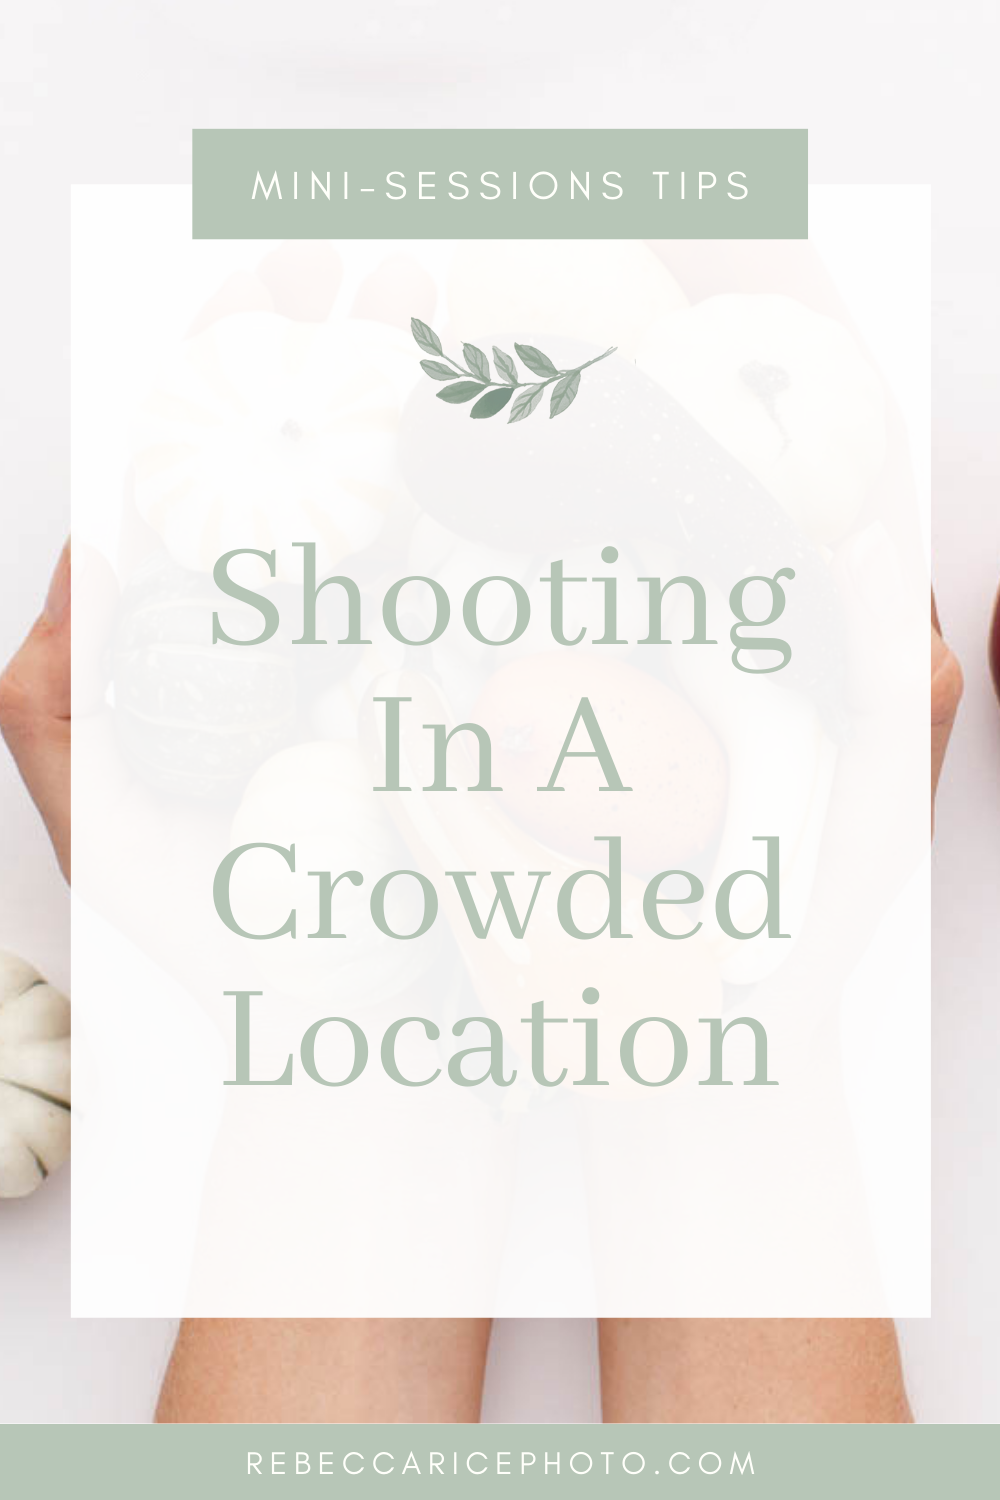 Shooting At a Crowded Location  // Rebecca Rice Education #minisessions #minisessionsideas #minisessionsinspiration #minisideas #minisessiontips #photographytips #familyphotography #familyphotographytips #businesstips #photolocationideas